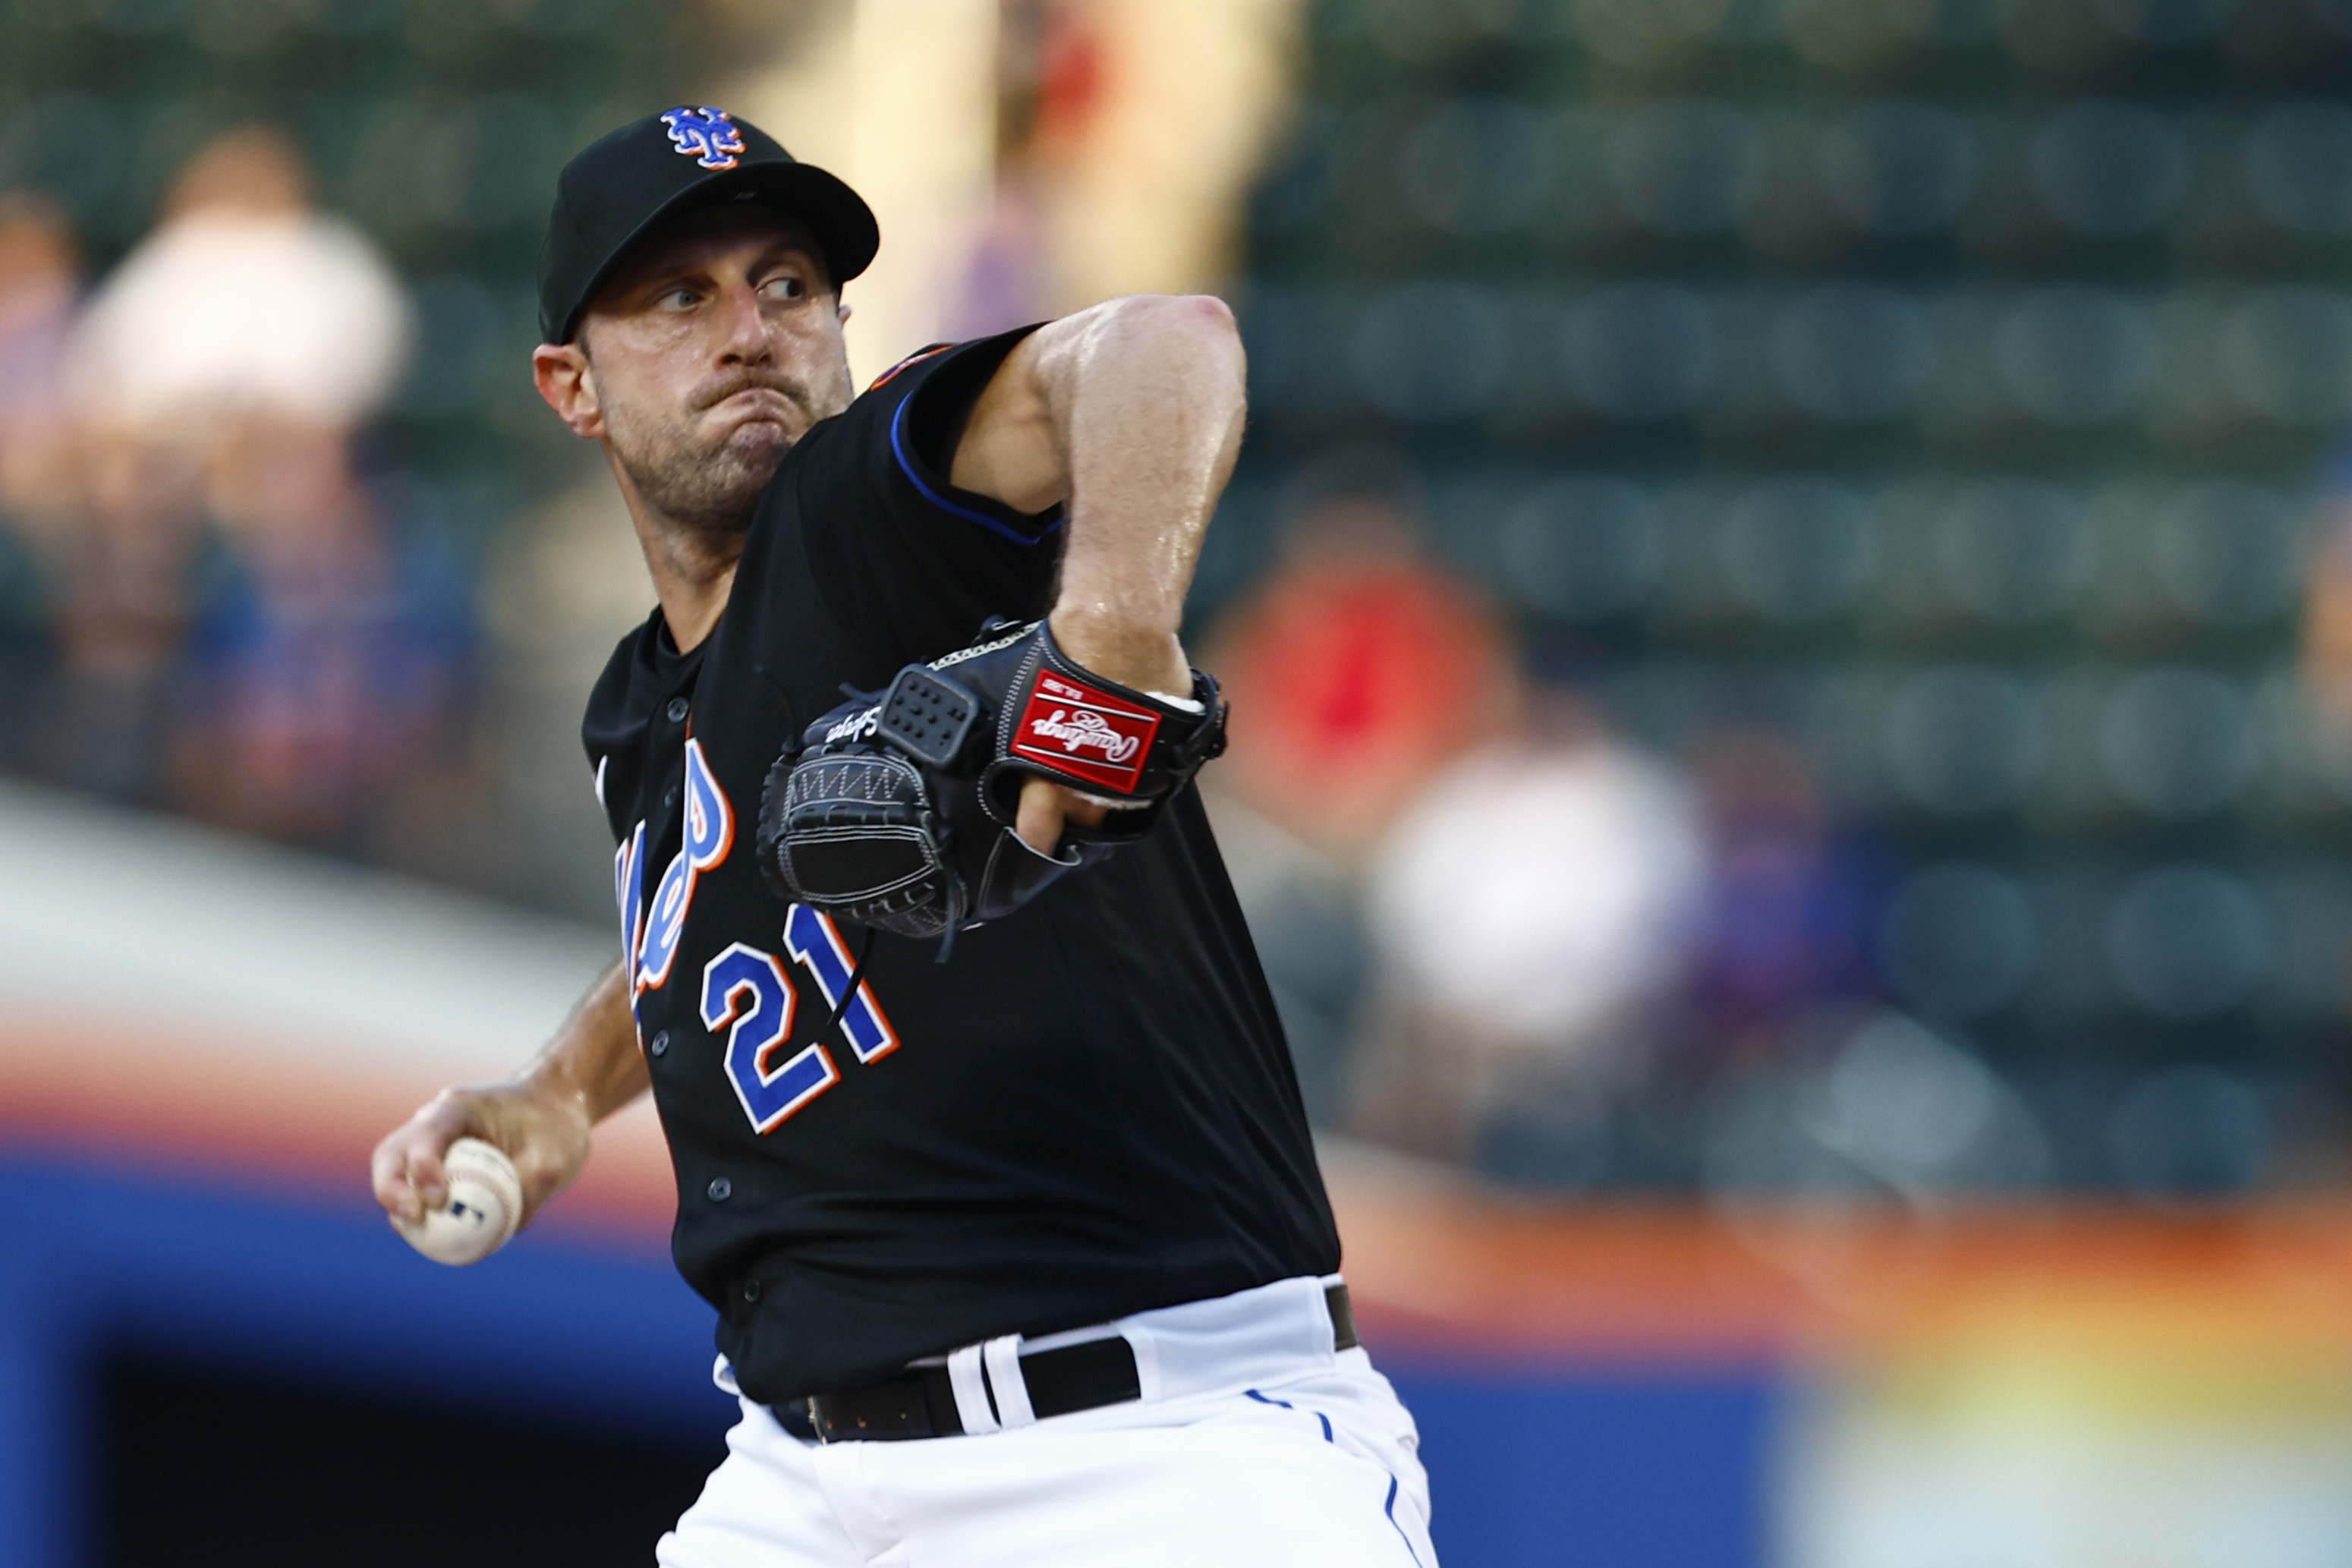 MLB - The Rangers have reportedly acquired RHP Max Scherzer from